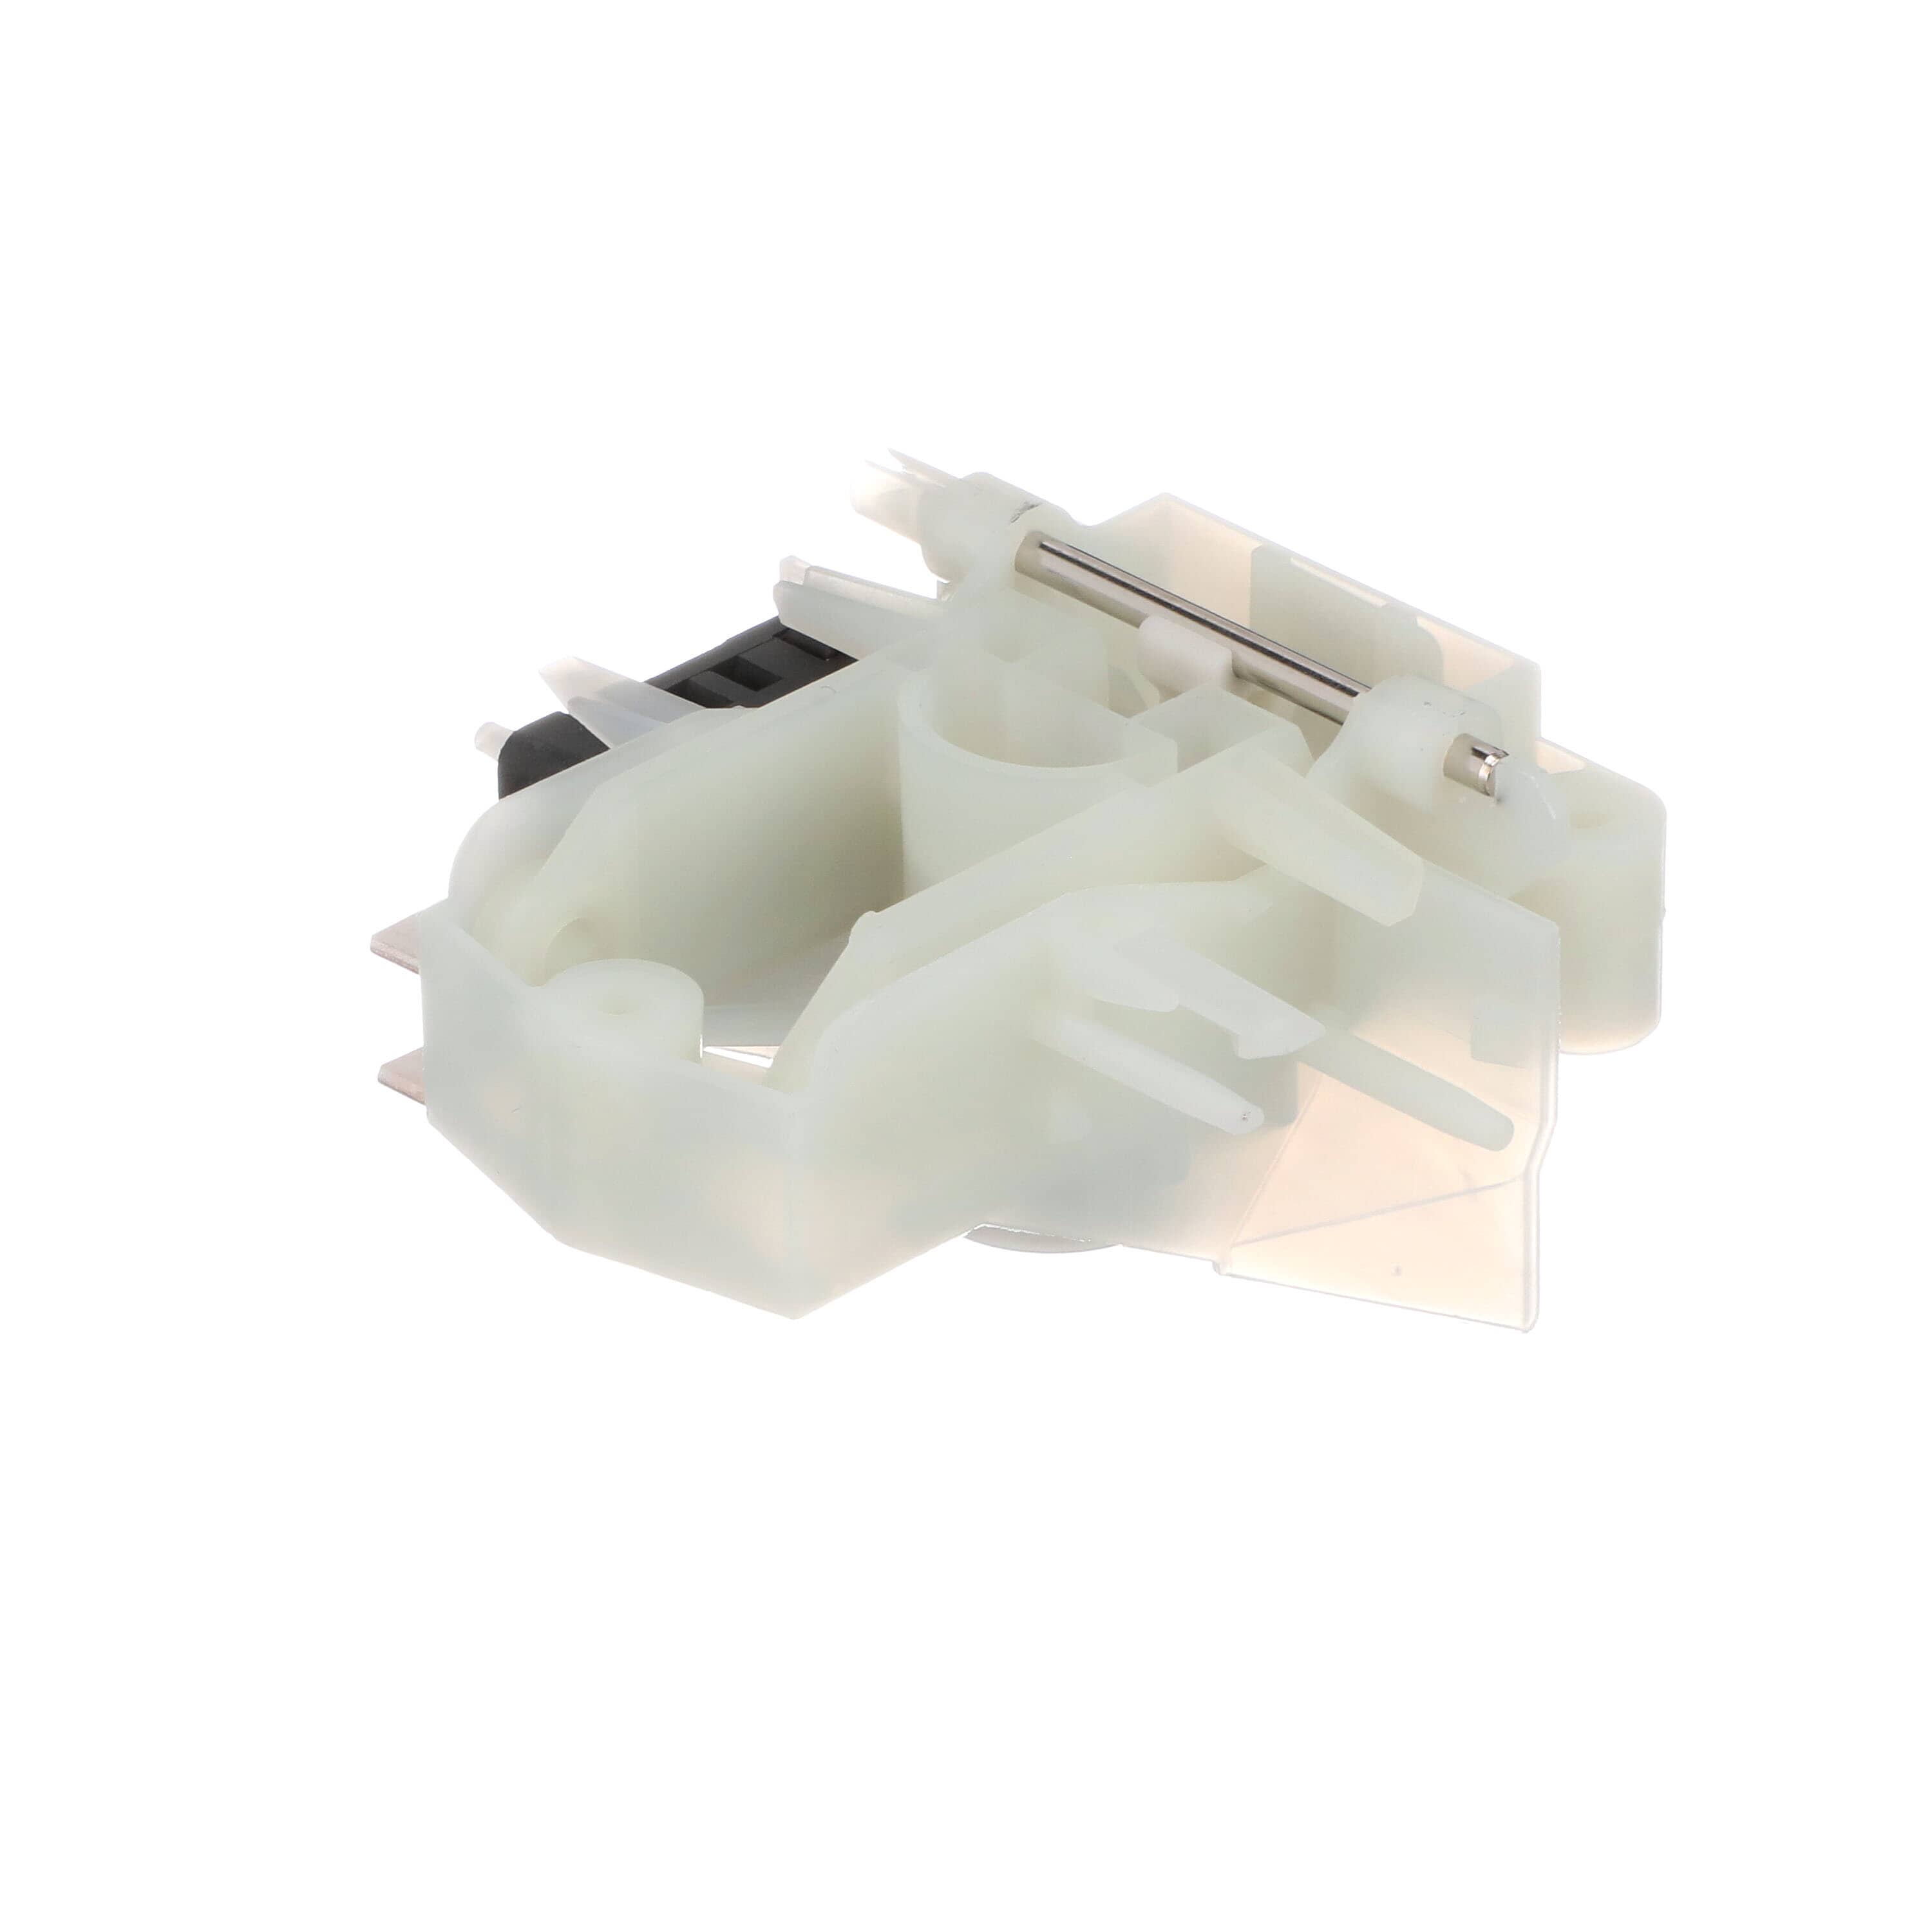 Dishwasher dd81 02132a replacement part